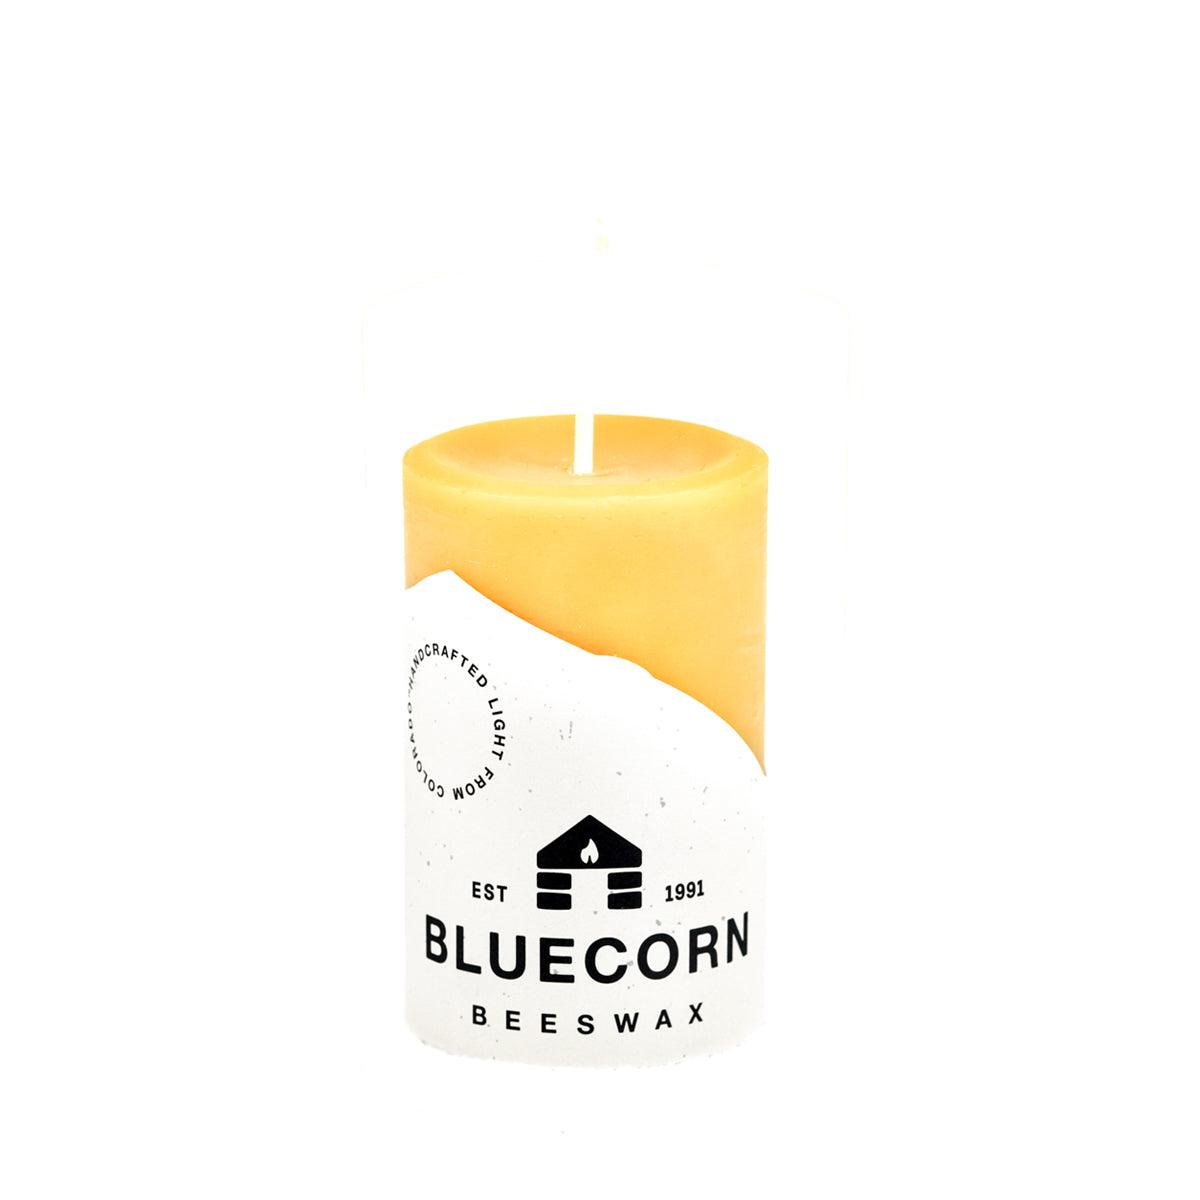 Bluecorn Beeswax 100% Pure Beeswax 2" x 3" Raw Pillar Candle. Burn Time: 25 Hours. Made with 100% pure cotton wick, no lead and paraffin free   . Wax is golden and color and label features Bluecorn label printed on white 100% recycled paper. Trim wick to 1/4" before each lighting. To avoid dripping, burn for only 1 hour at a time. To eliminate smoke when extinguishing the flame, use a tool to drip wax from the molten pool onto the burning wick.